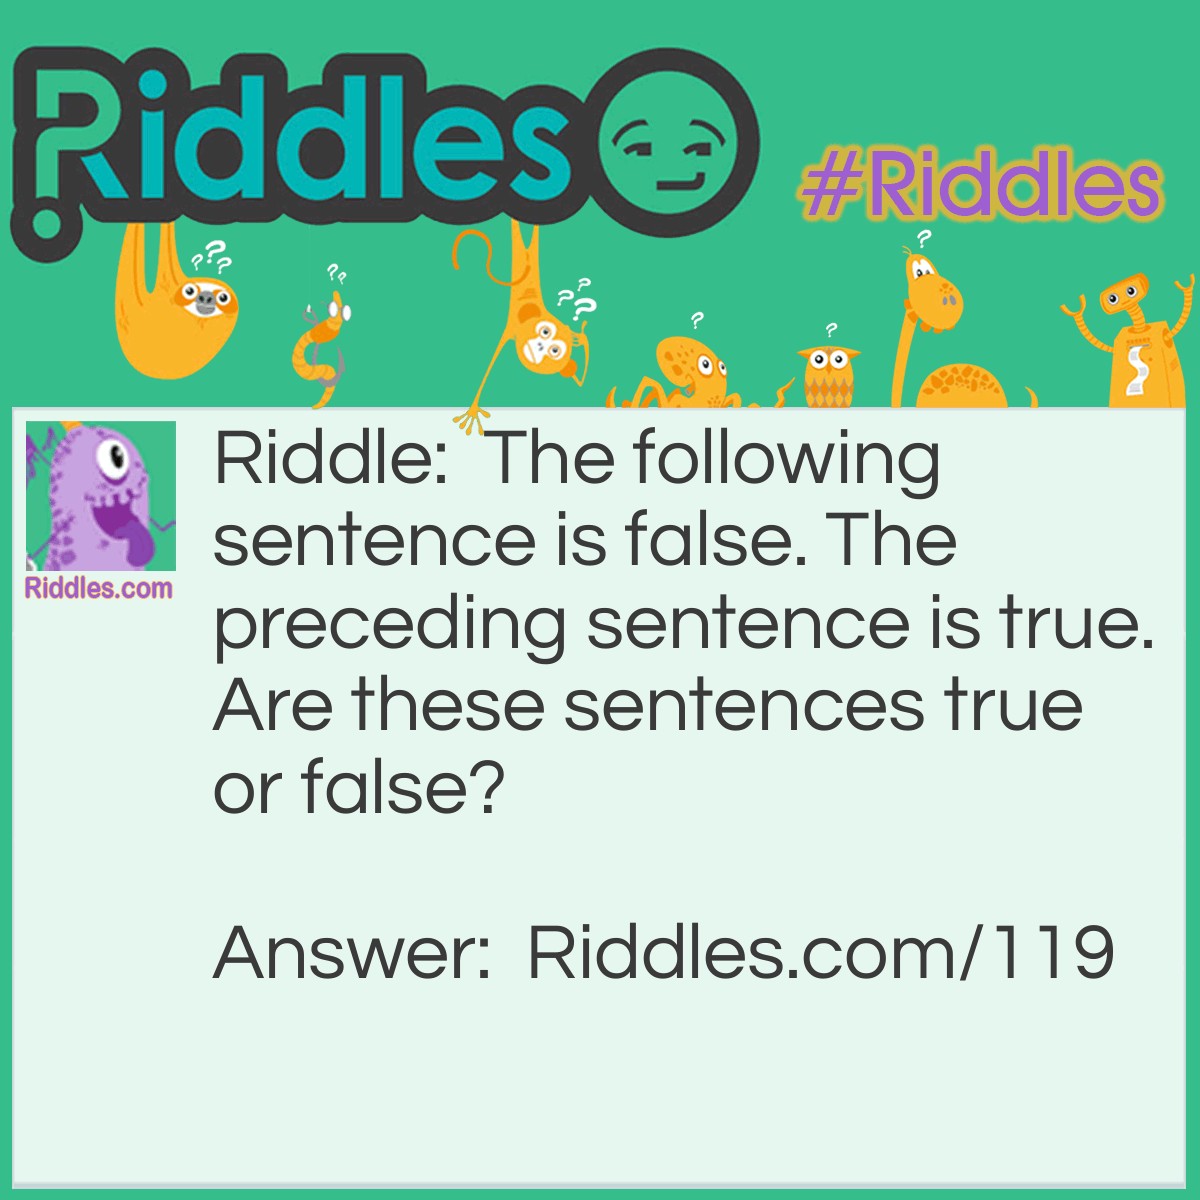 Riddle: The following sentence is false. The preceding sentence is true. Are these sentences true or false? Answer: Neither, it's a paradox. If the first is true, then the second must be false, which makes the first false; it doesn't work.